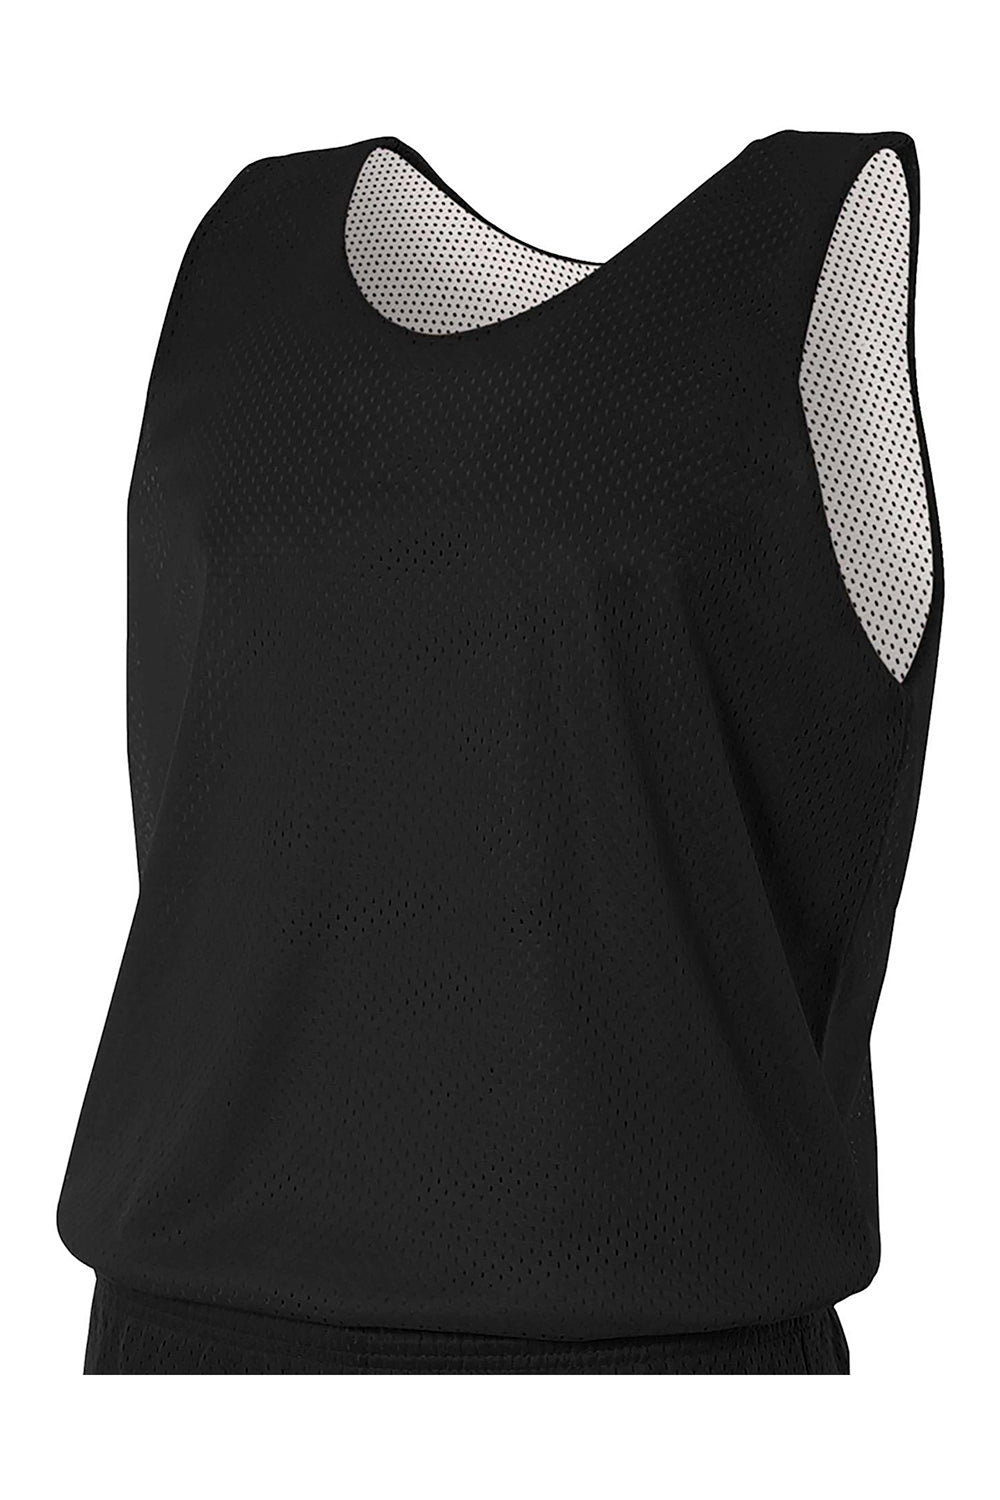 A4 NF1270 Mens Reversible Mesh Moisture Wicking Tank Top Black Flat Front